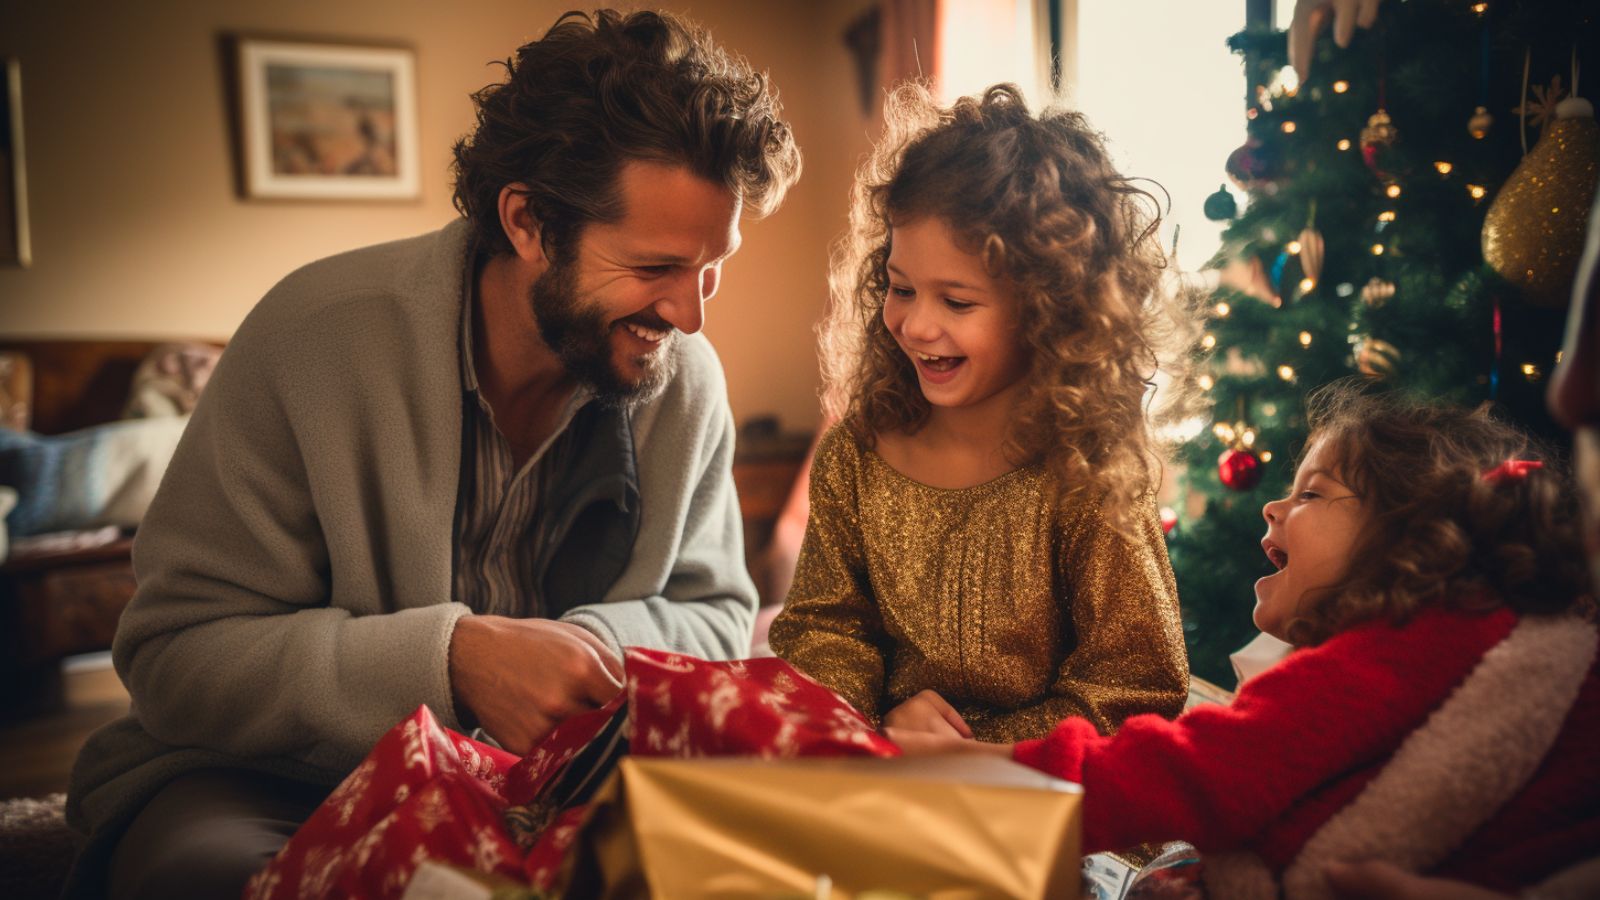 A father opening presents with his two young daughters on Christmas morning.